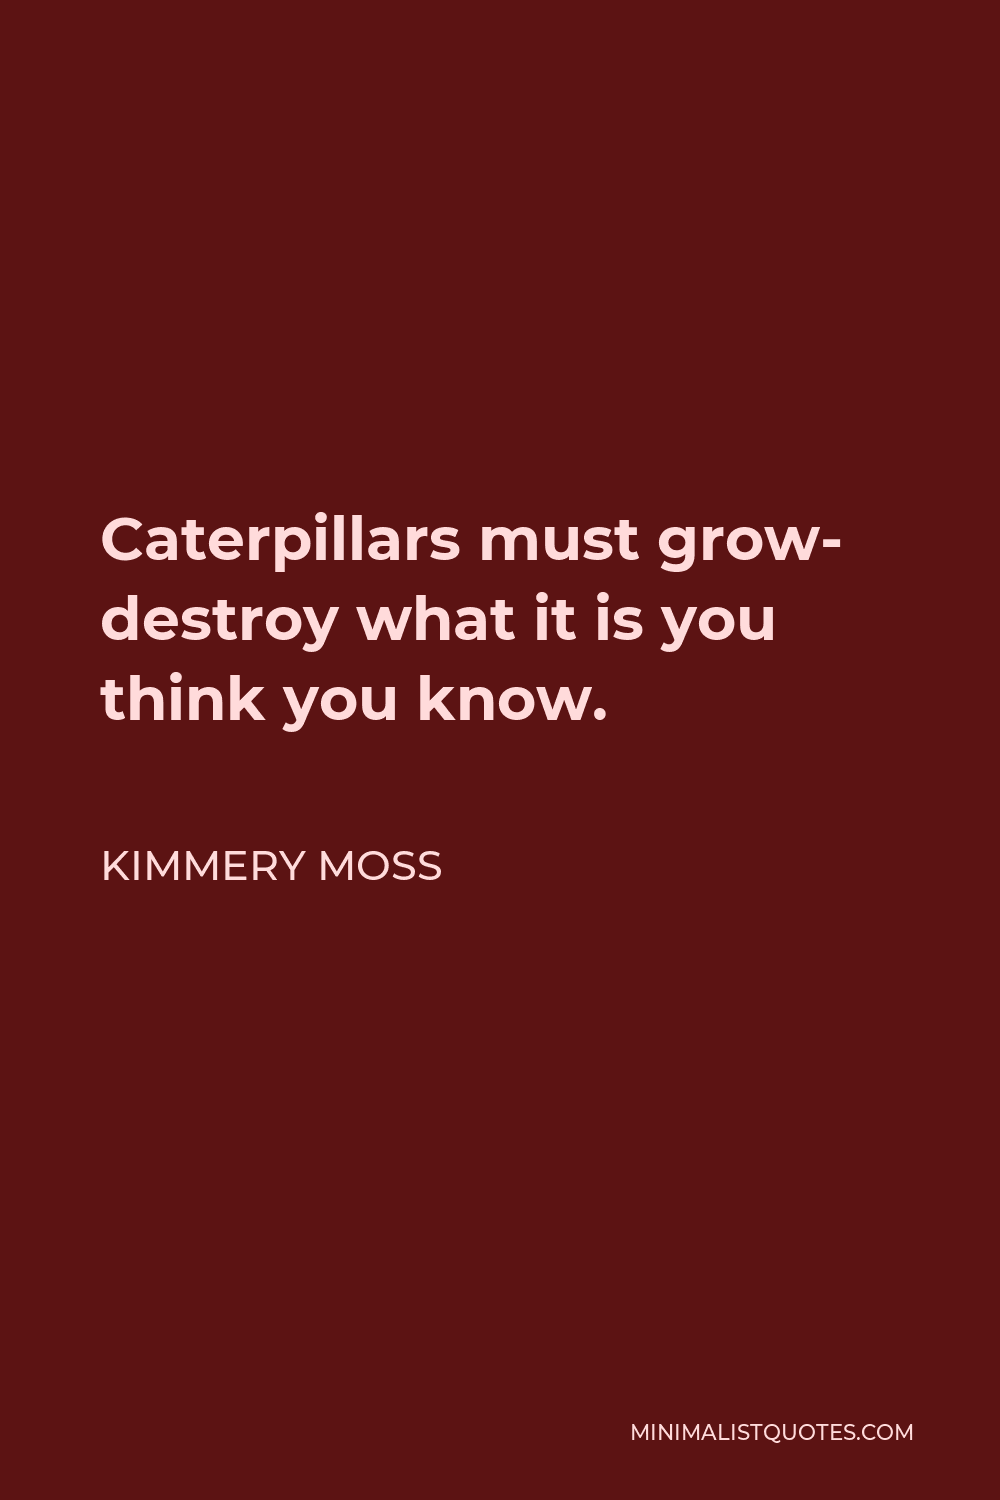 Kimmery Moss Quote - Caterpillars must grow- destroy what it is you think you know.